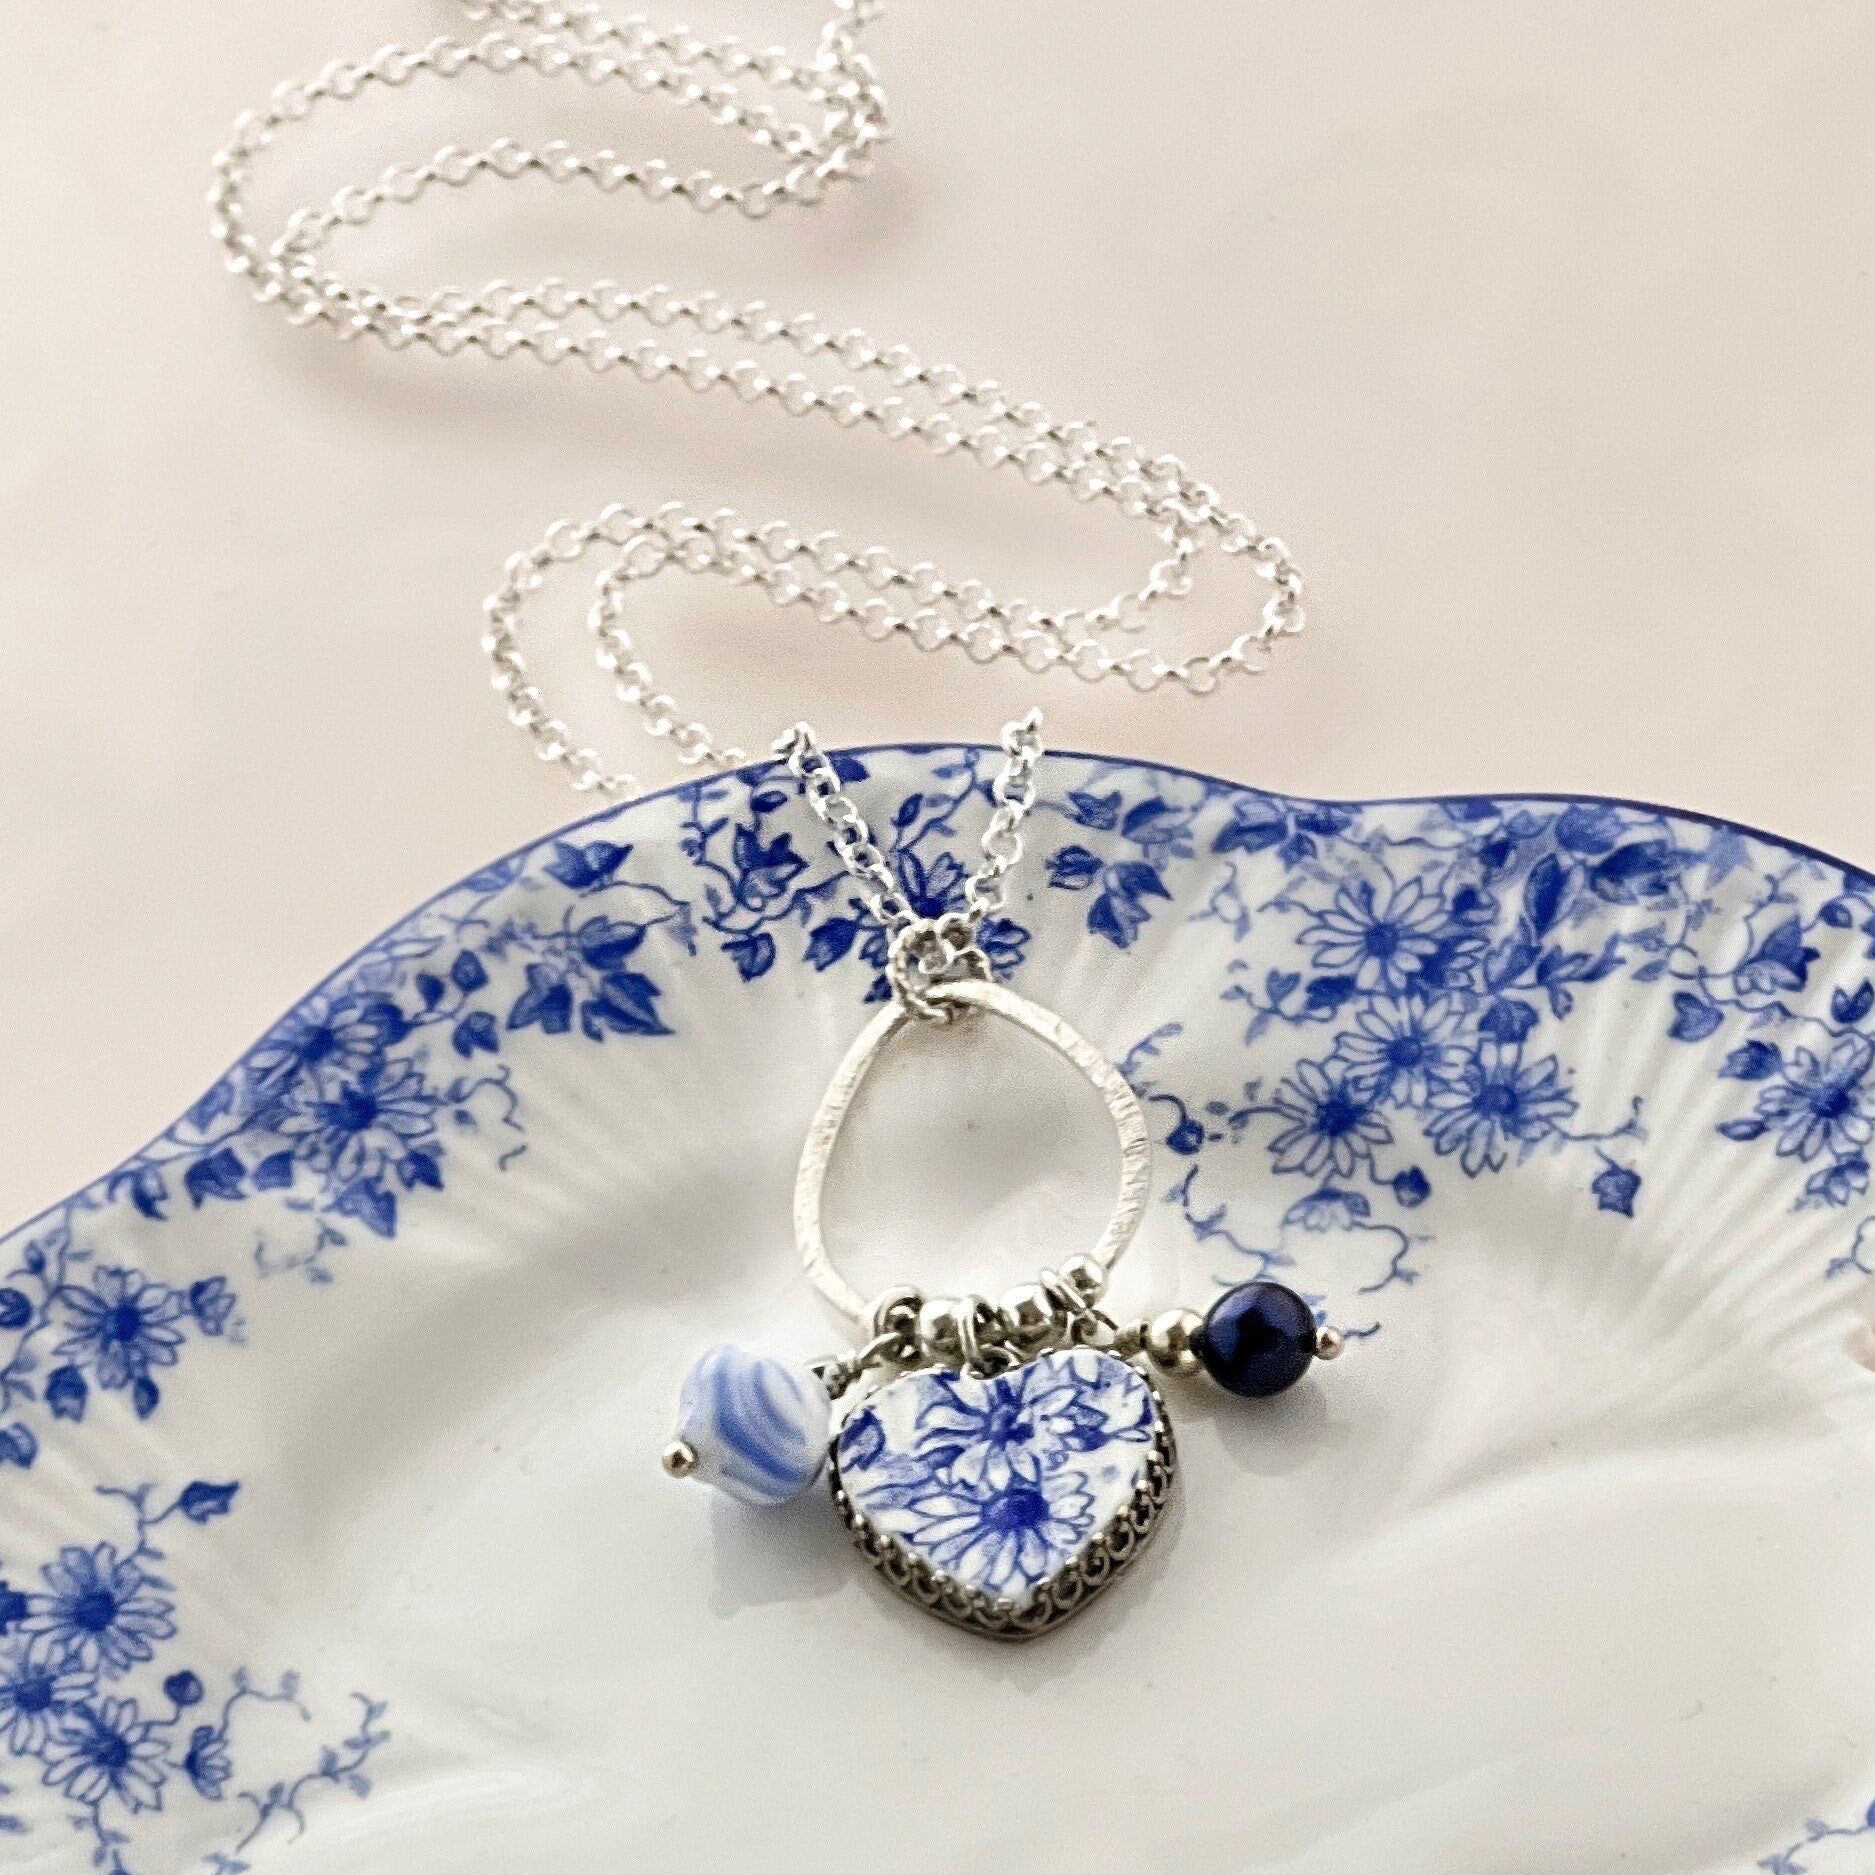 Shelley Dainty Blue China, Sterling Silver Broken China Jewelry, Daisy Charm Necklace, Unique 20th Anniversary Gifts for Wife